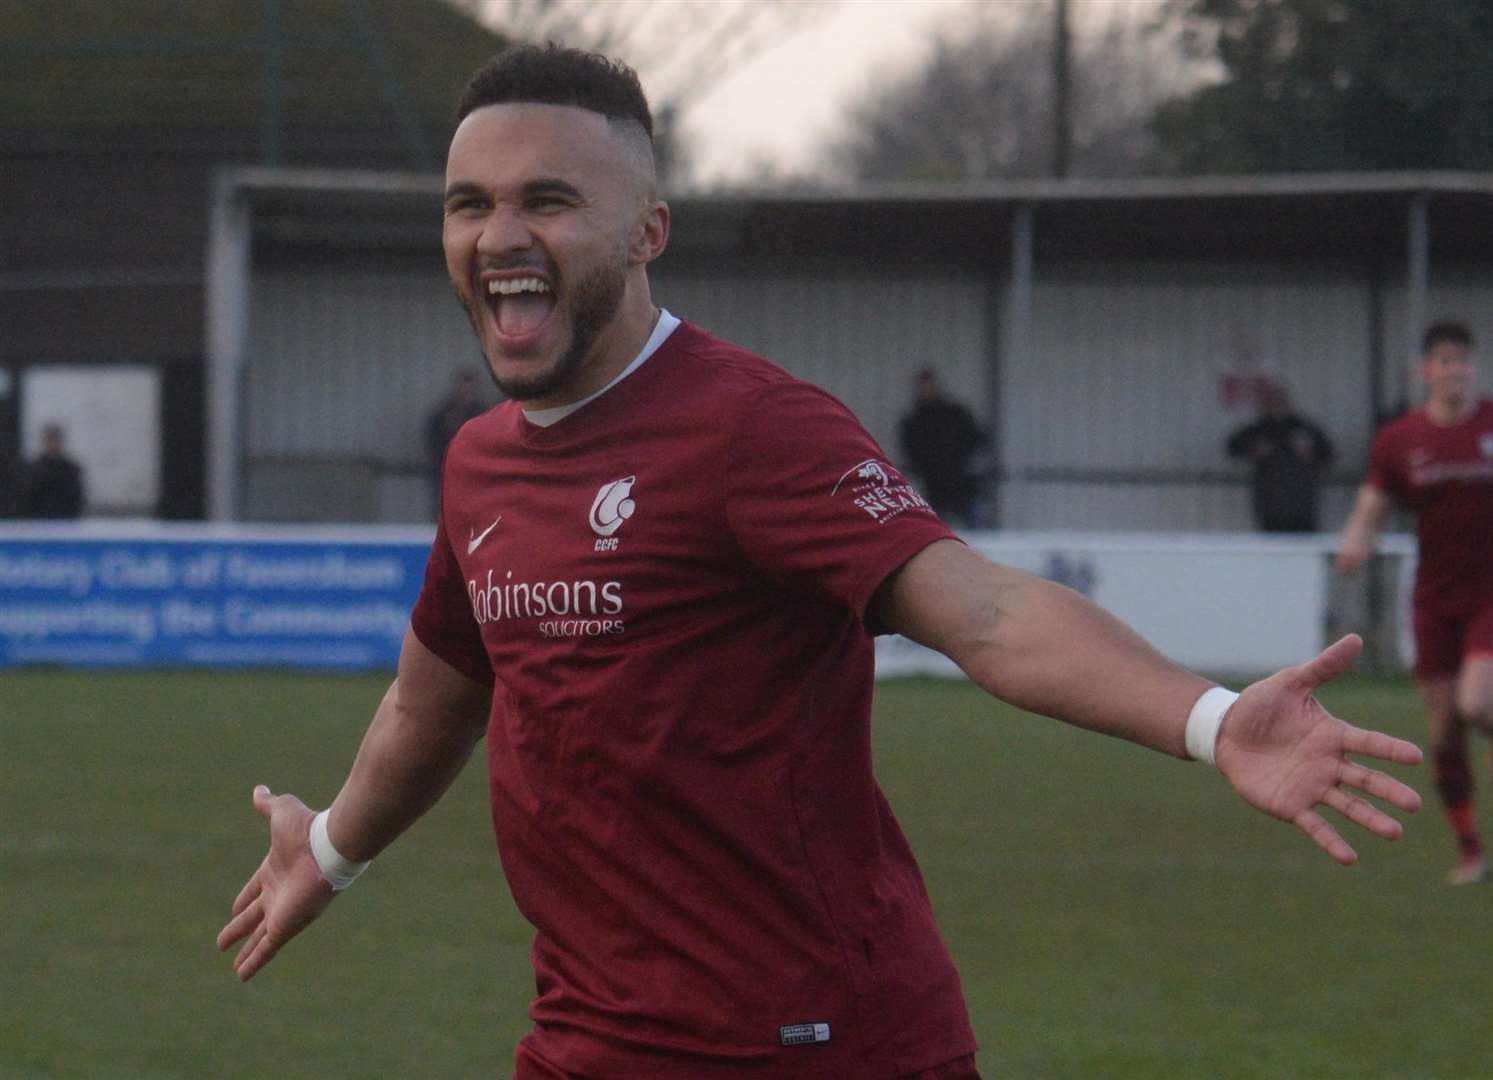 Canterbury City striker Dean Grant celebrates scoring the second goal in their 2-1 FA Vase victory Picture: Chris Davey